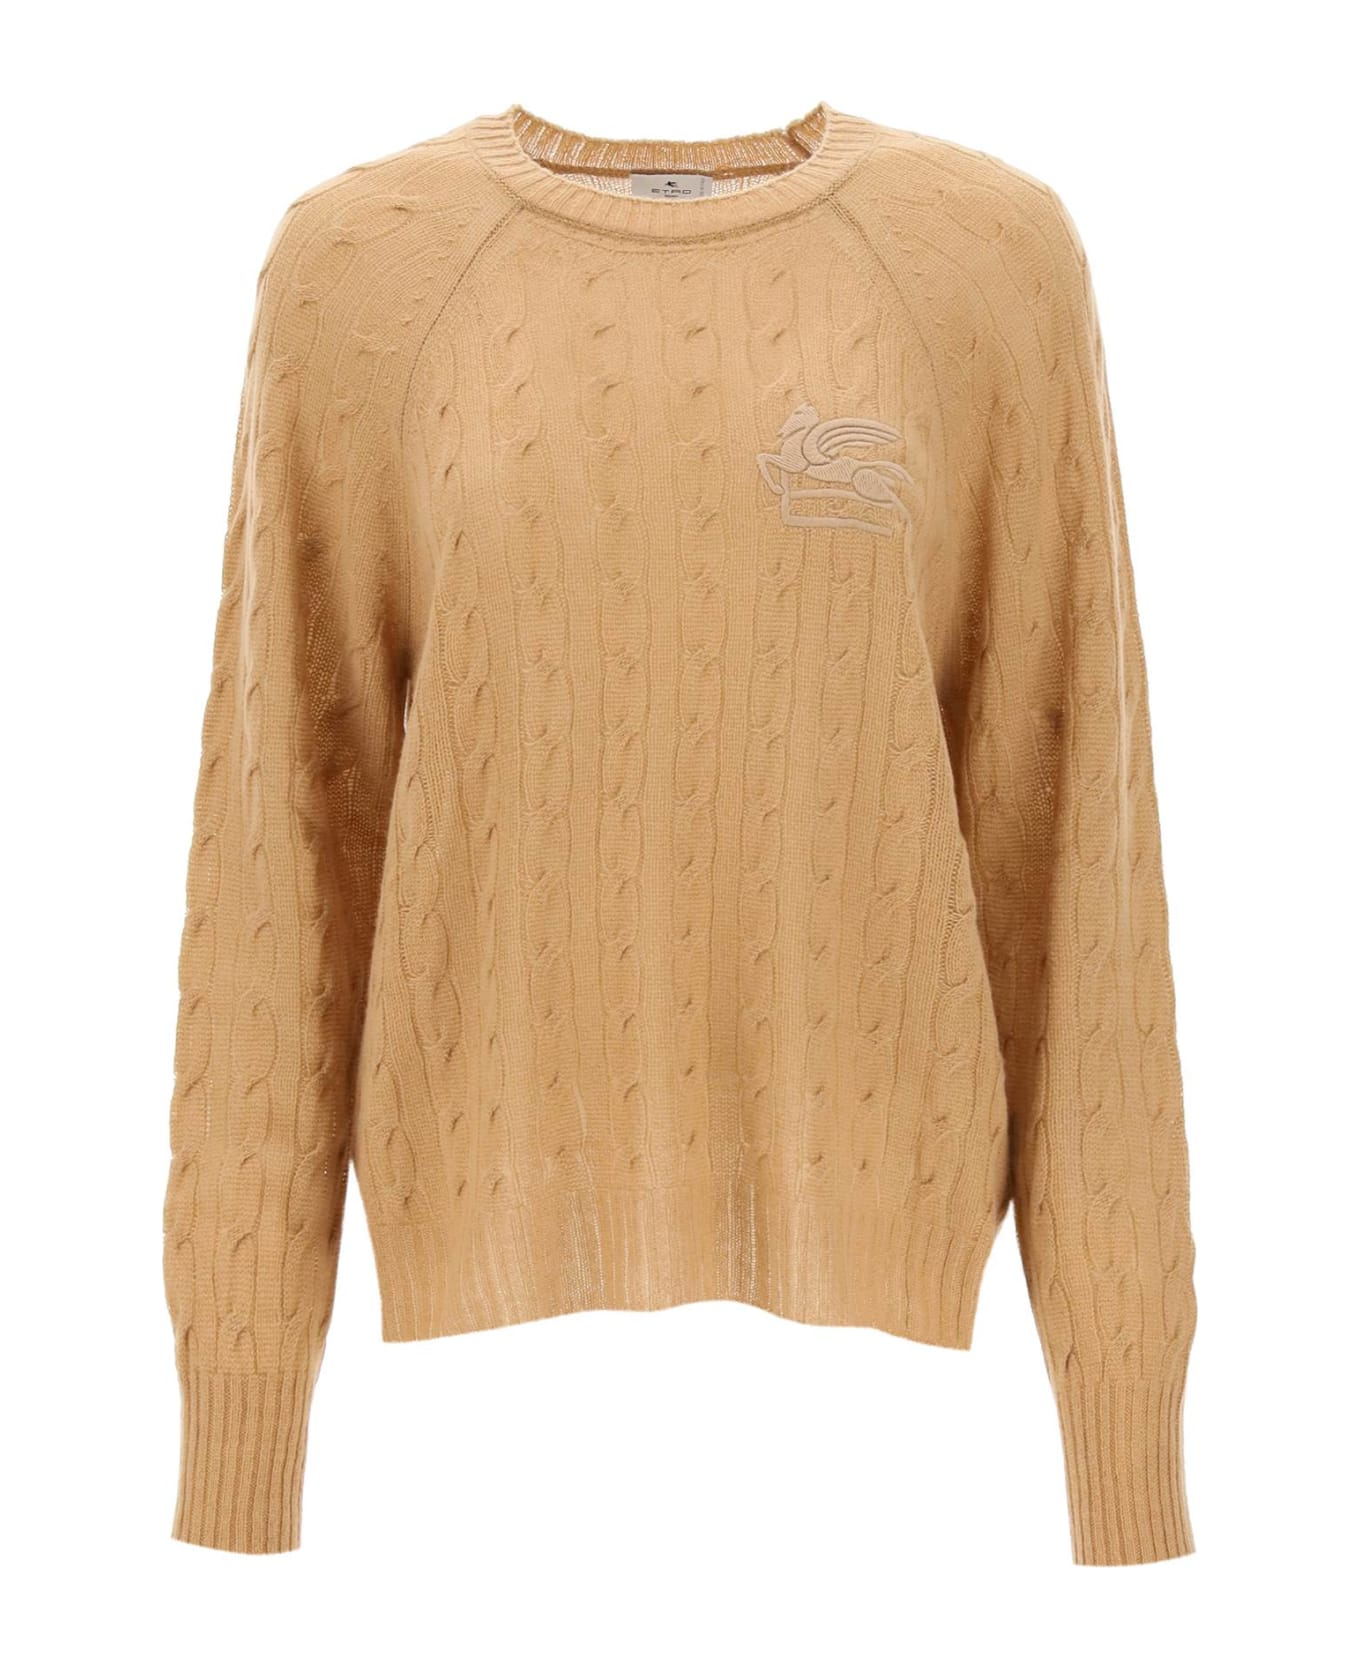 Etro Cashmere Sweater With Pegasus Embroidery - Brown